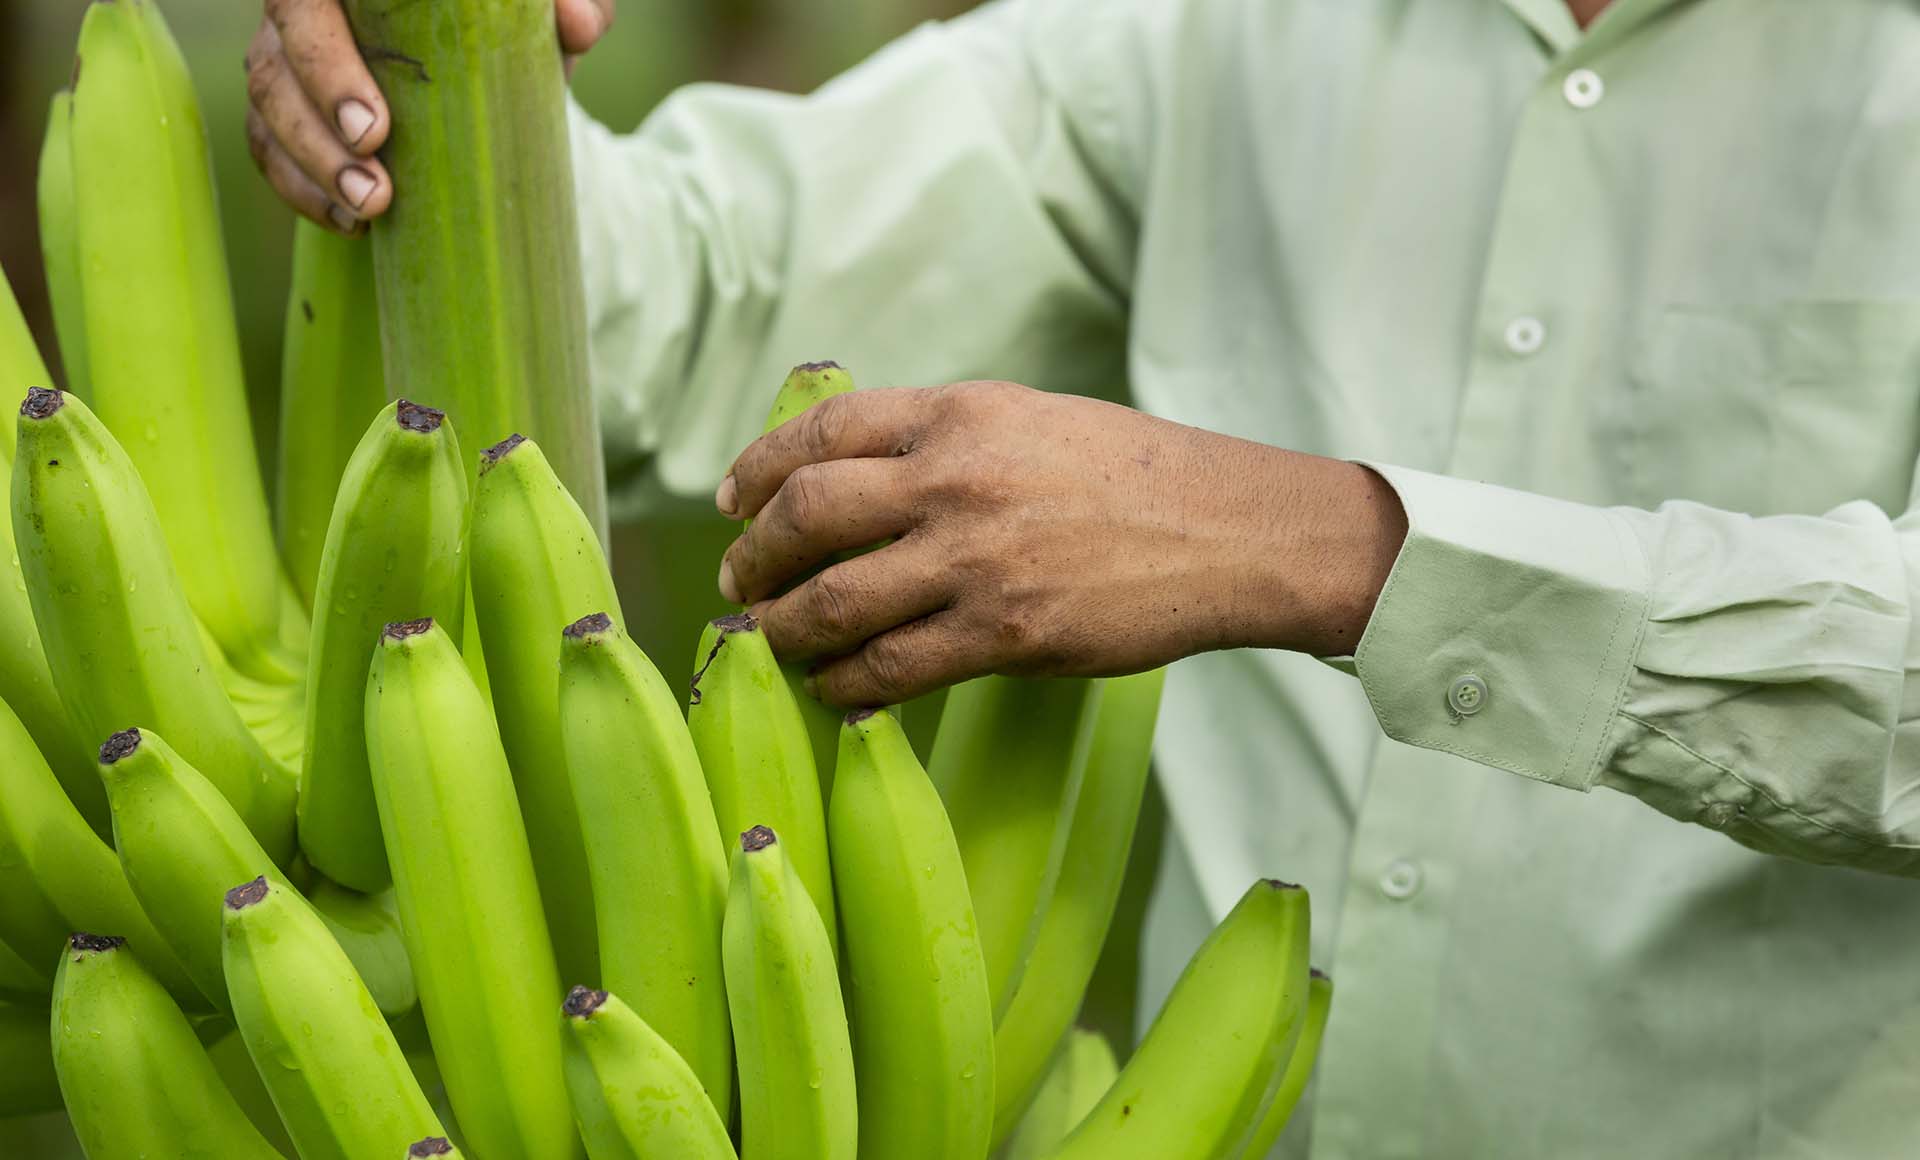 Tropic’s Non-Browning Gene-Edited Banana Cleared for Production in the Philippines